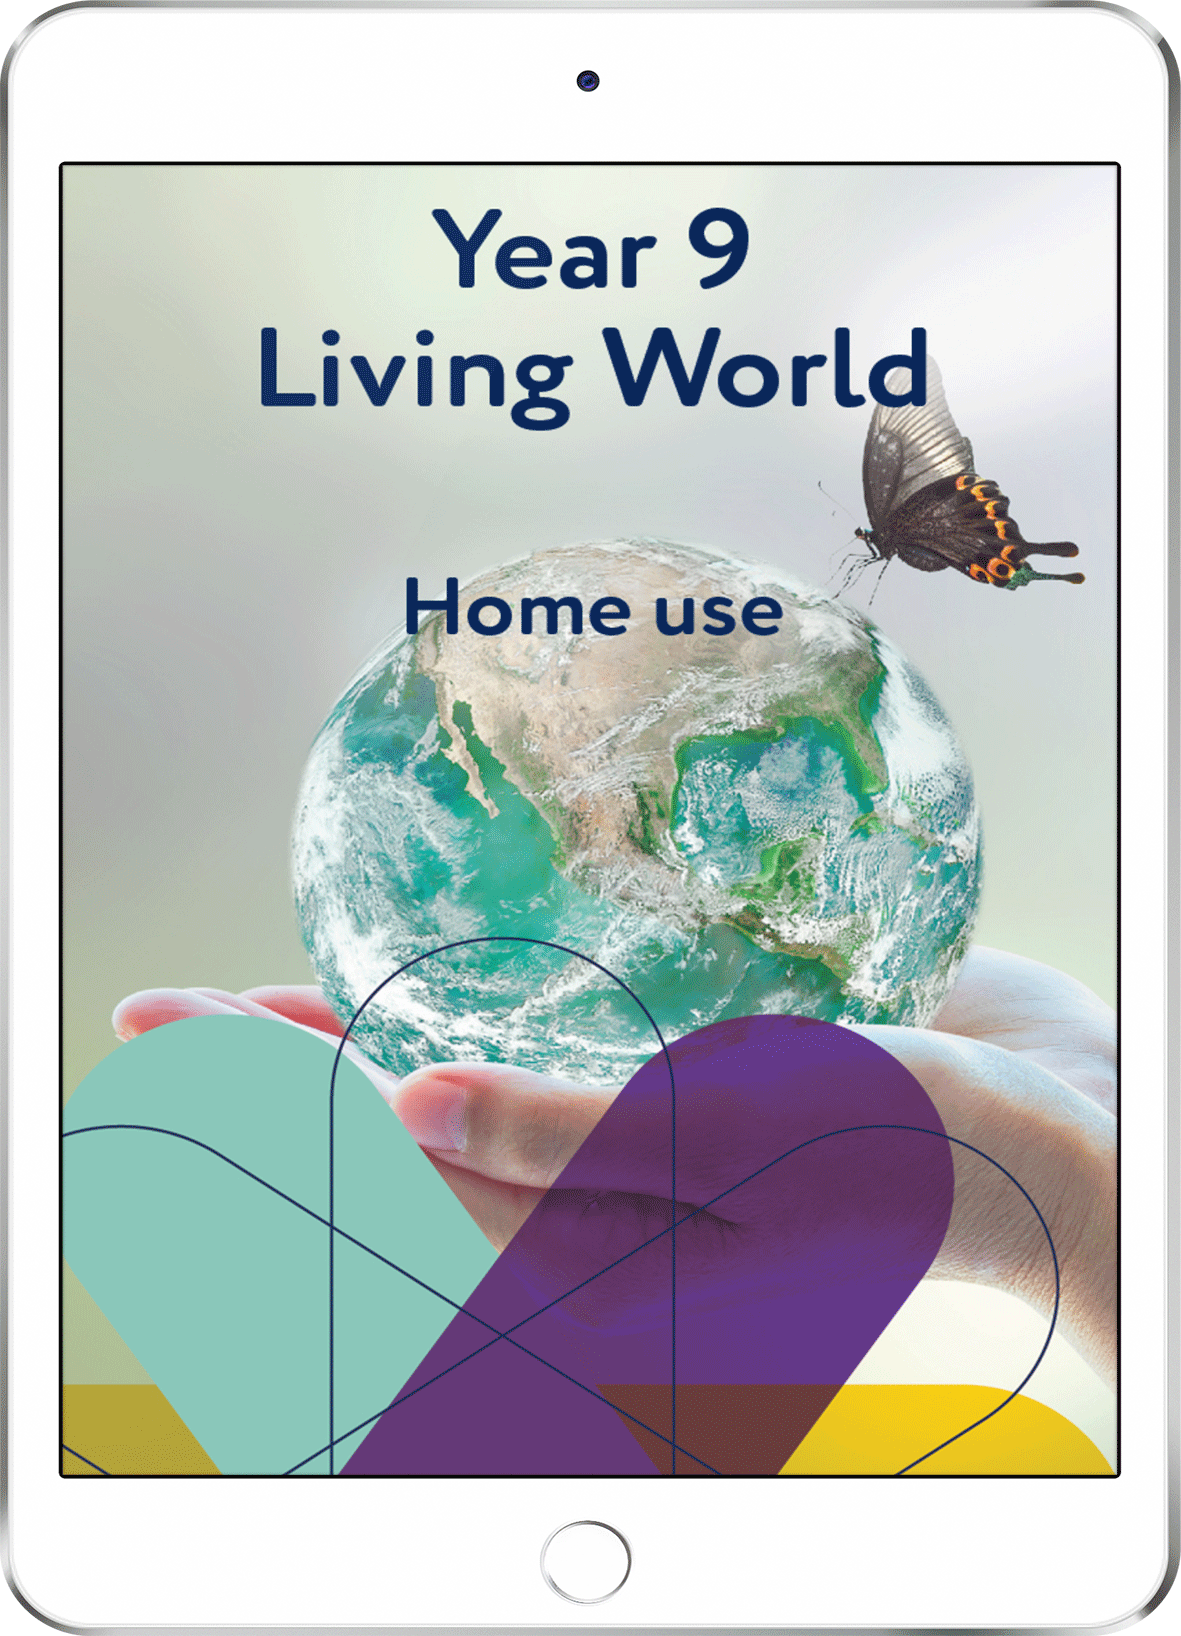 Year 9 Living World - Home Use